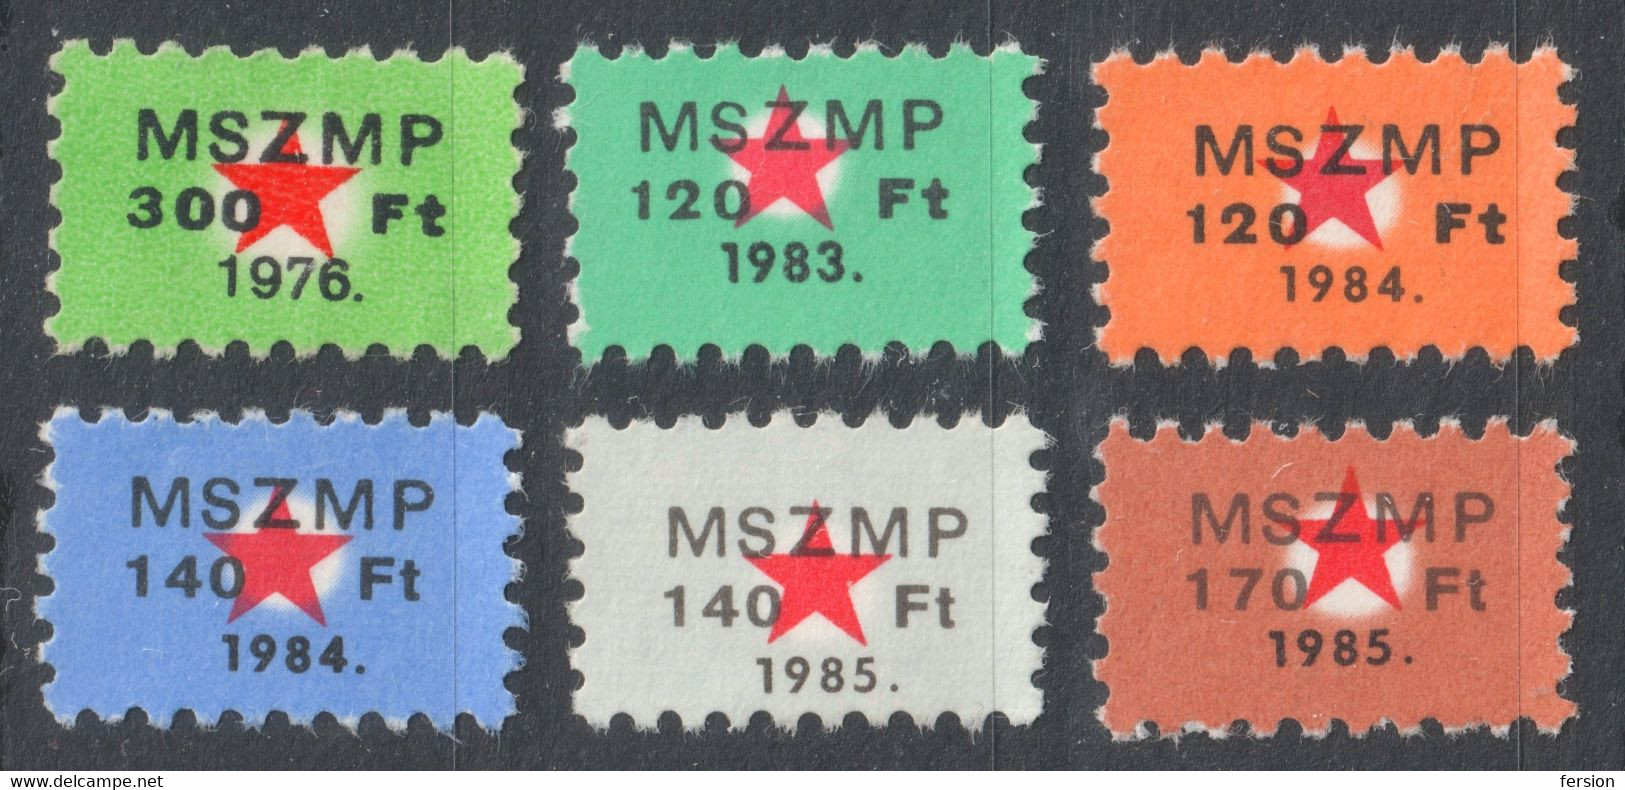 Communist Communism RED STAR Membership Stamp Hungarian Socialist Workers Party MSZMP Red Star HUNGARY Used LOT - Servizio